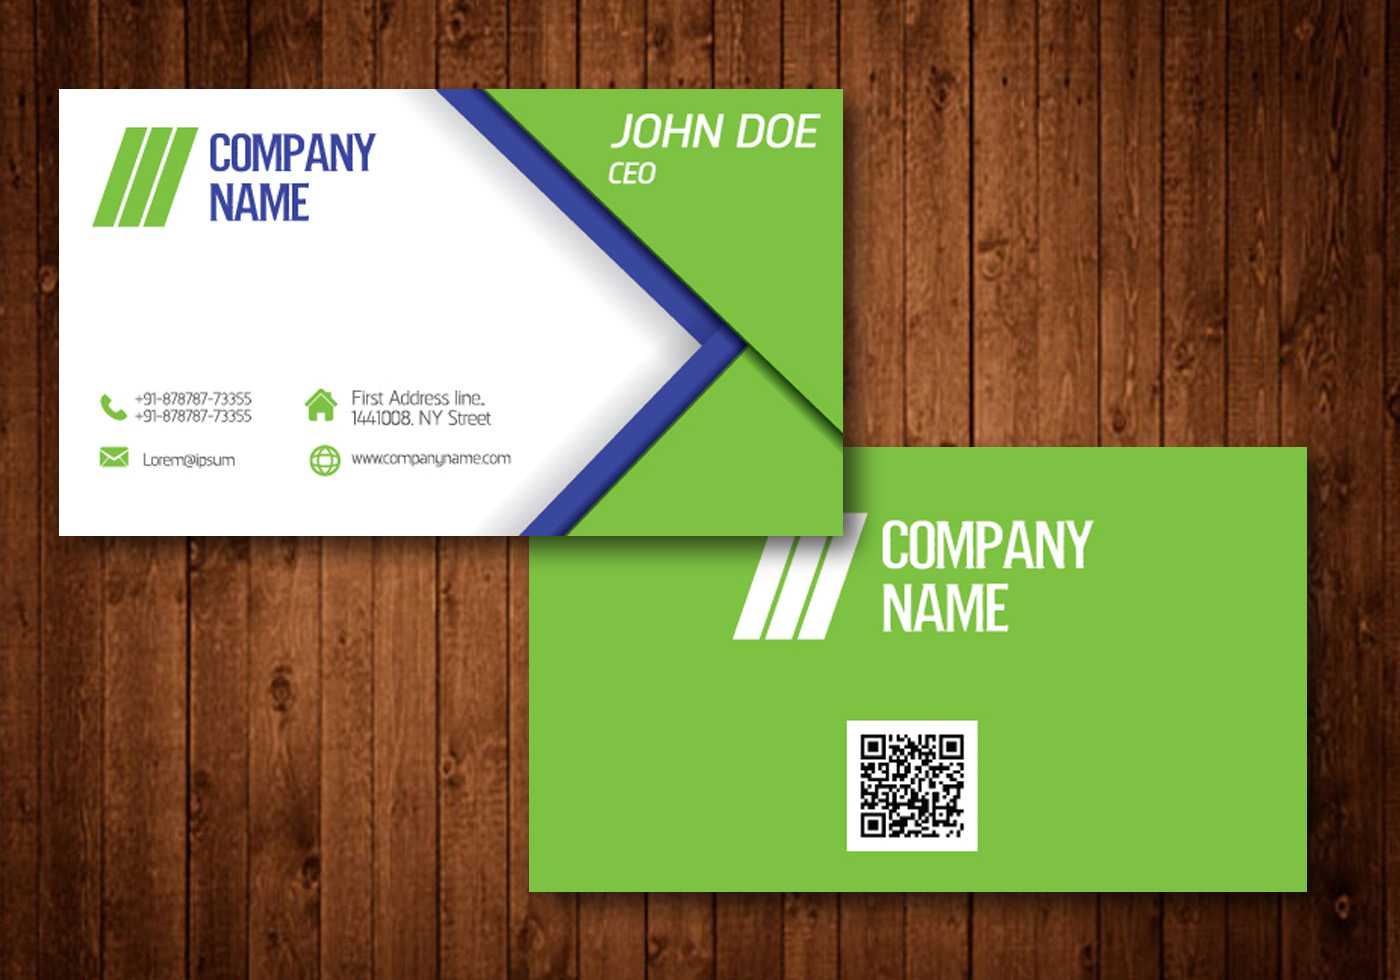 Business Card Free Vector Art – (109,932 Free Downloads) With Regard To Templates For Visiting Cards Free Downloads